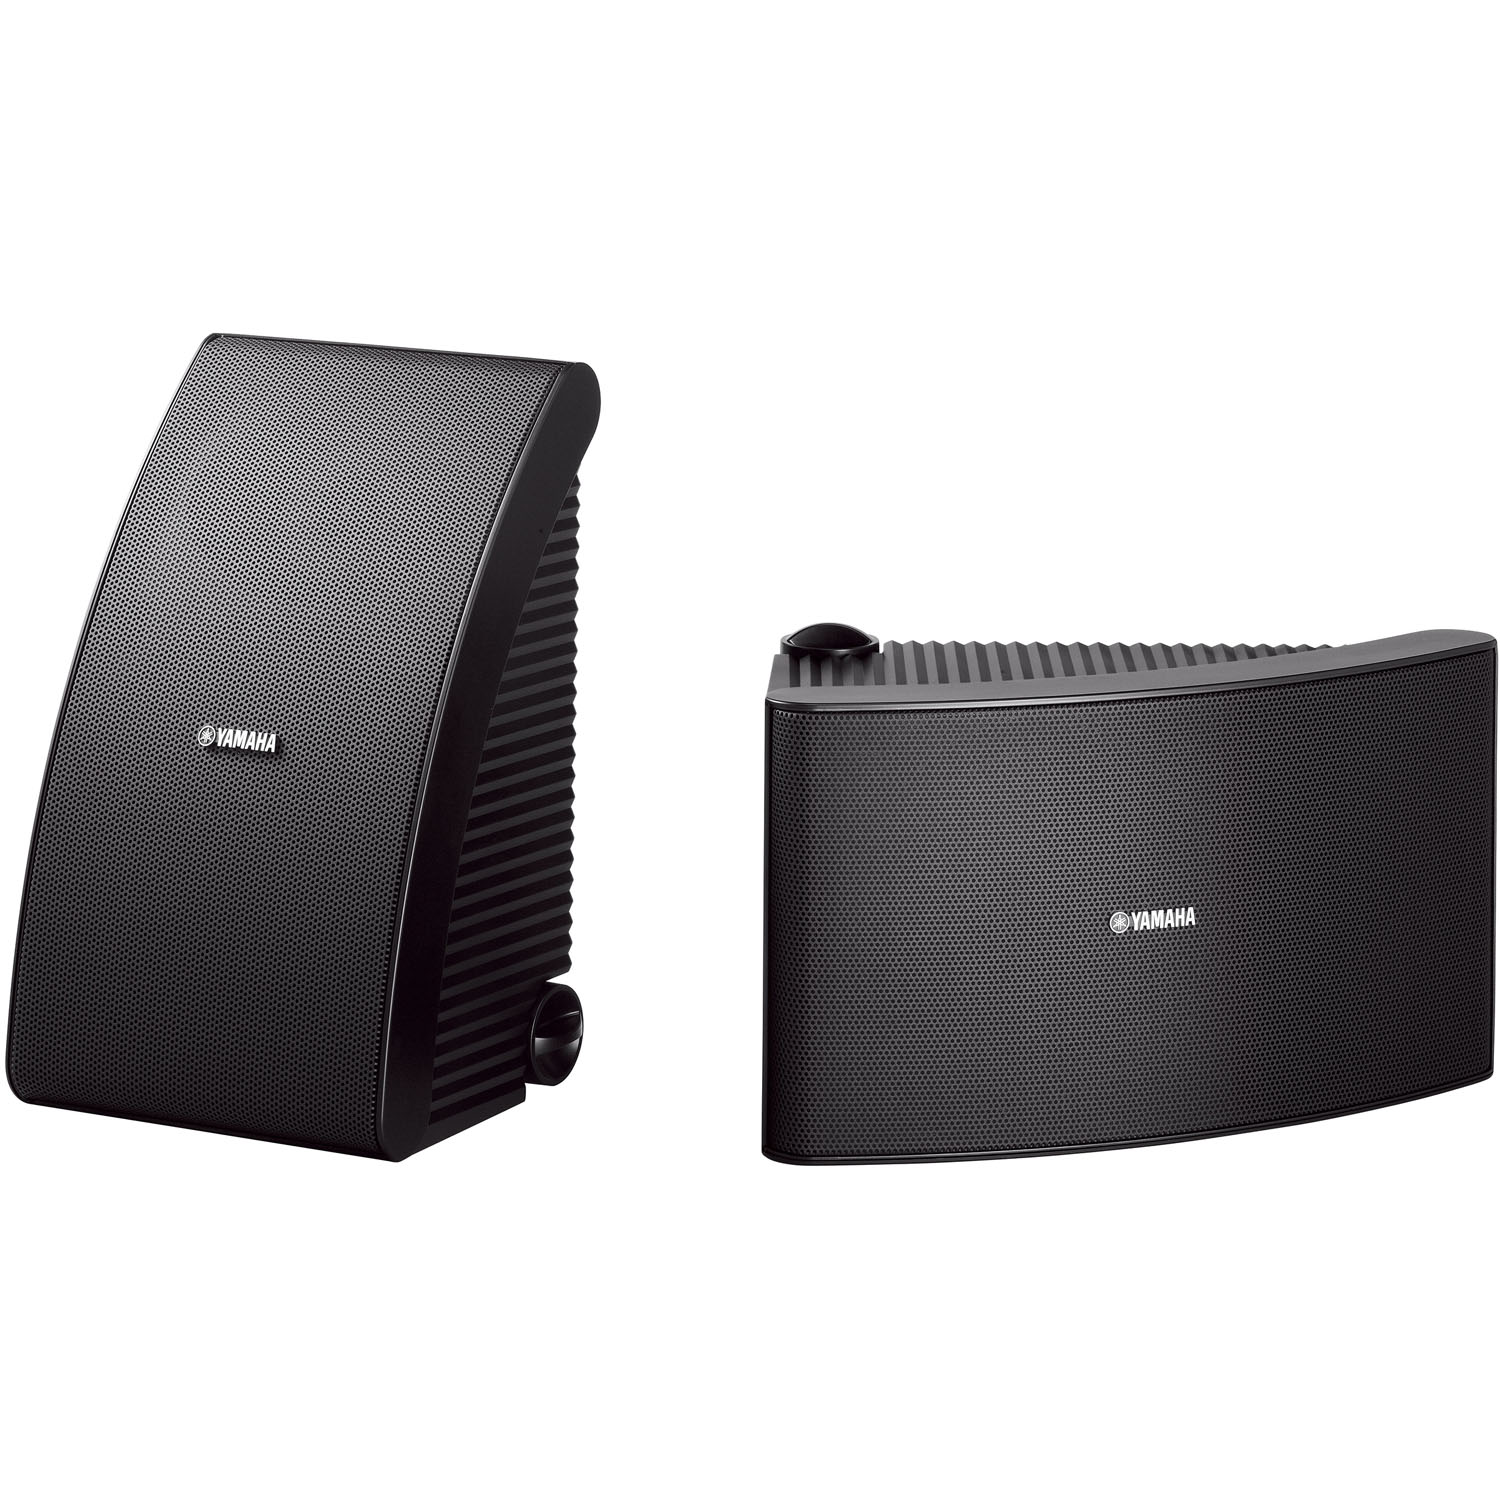 Yamaha NS-AW592 All-Weather Outdoor Speakers - Pair (Black) - image 1 of 3